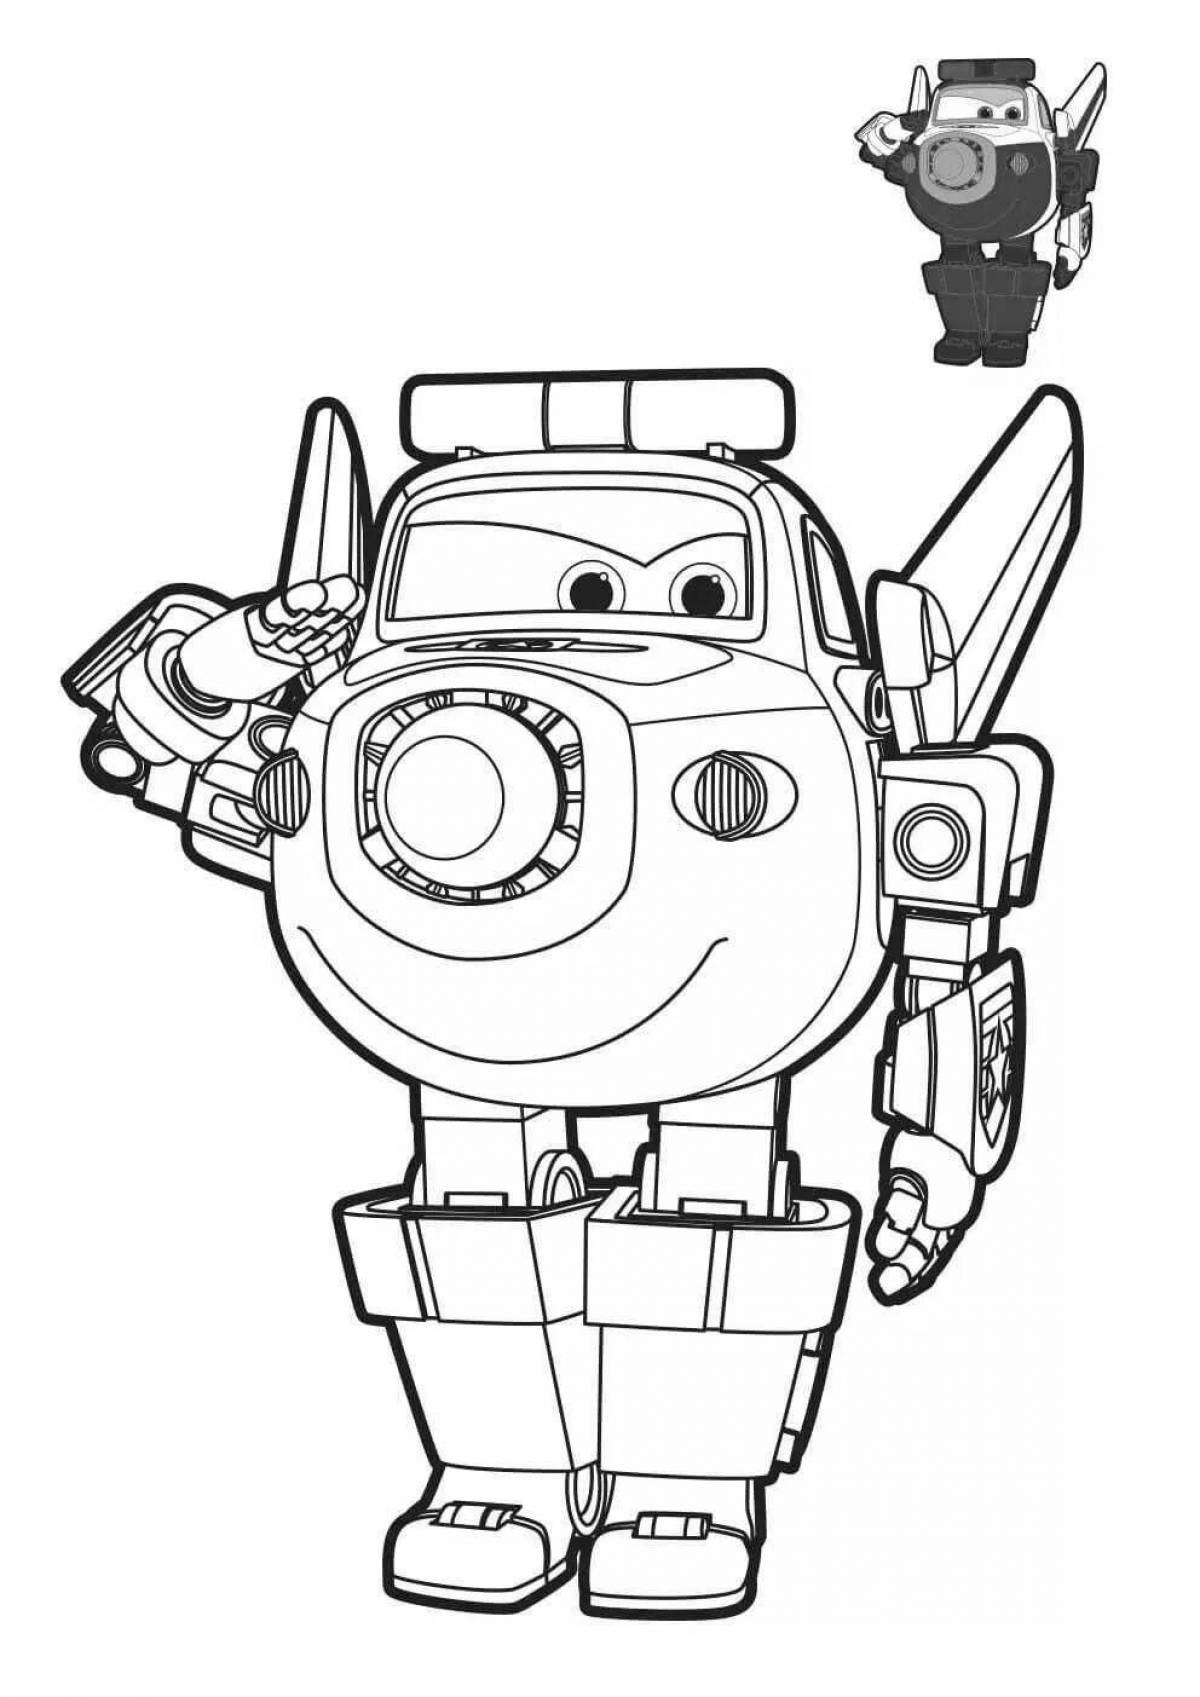 Coloring page funny police robot